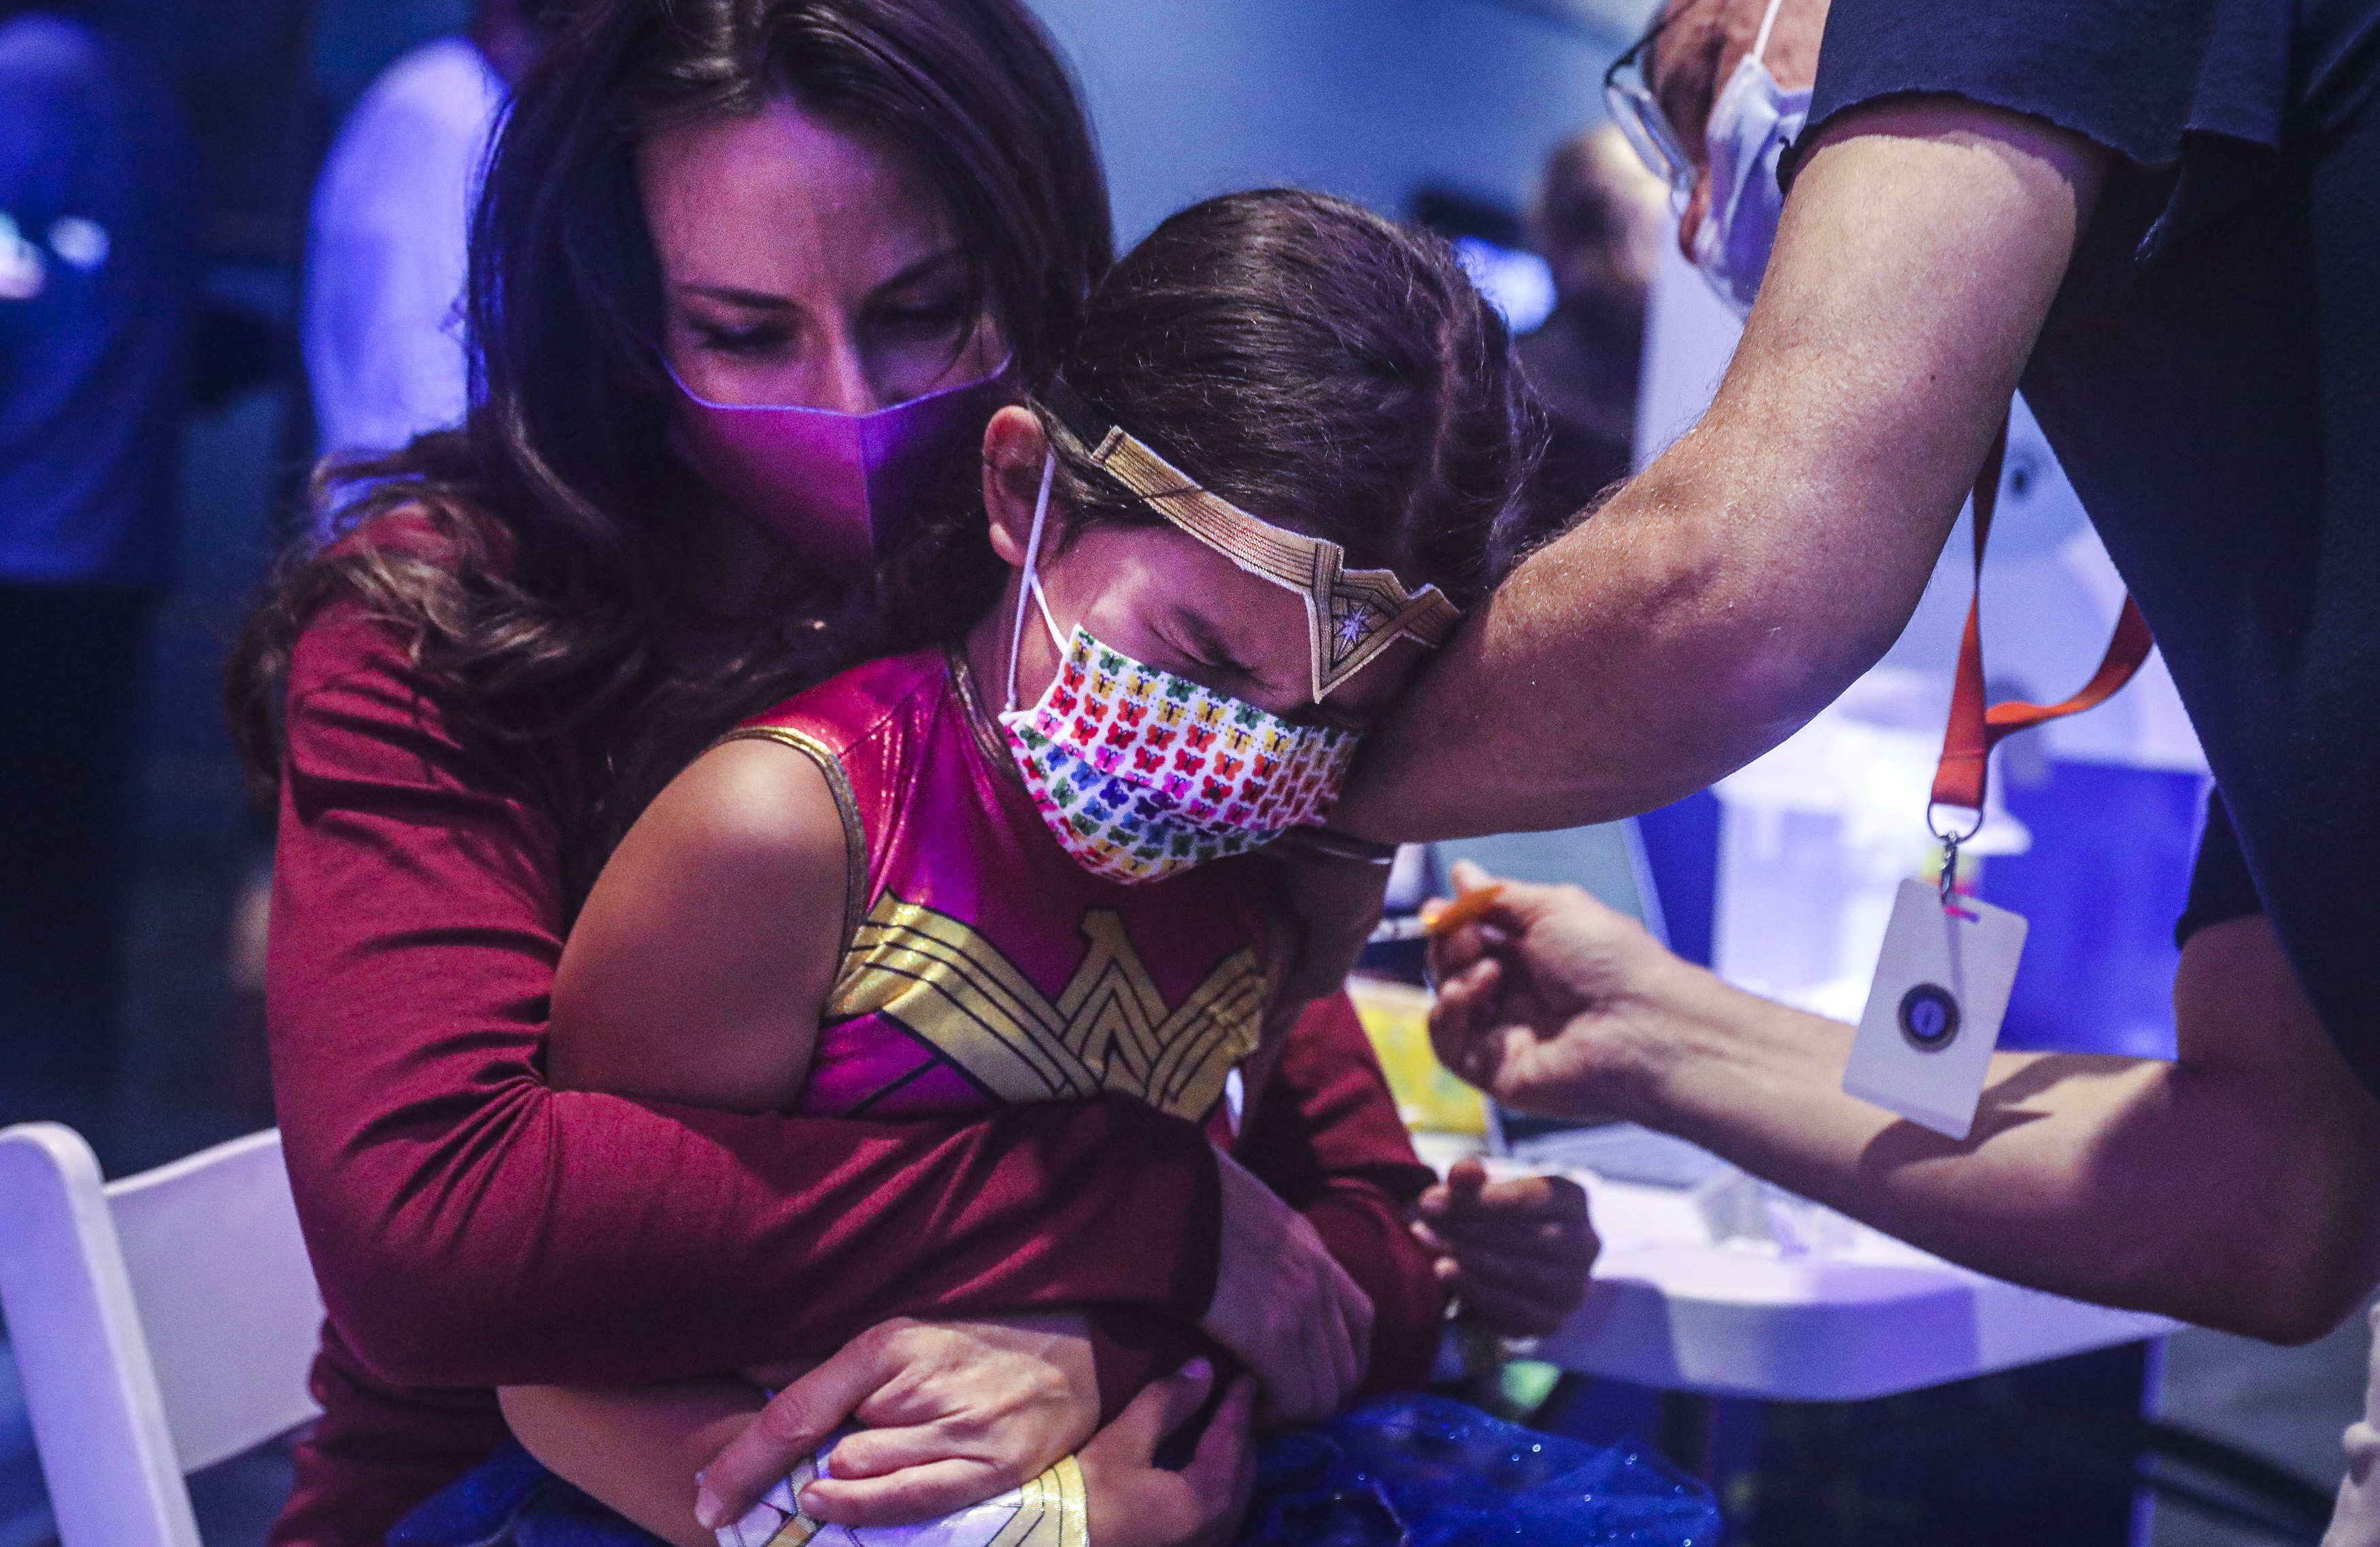 dr.  Elizabeth Taglauer held her 7-year-old daughter Alanna Khan, who was dressed as a superwoman, while she received her COVID-19 vaccine.